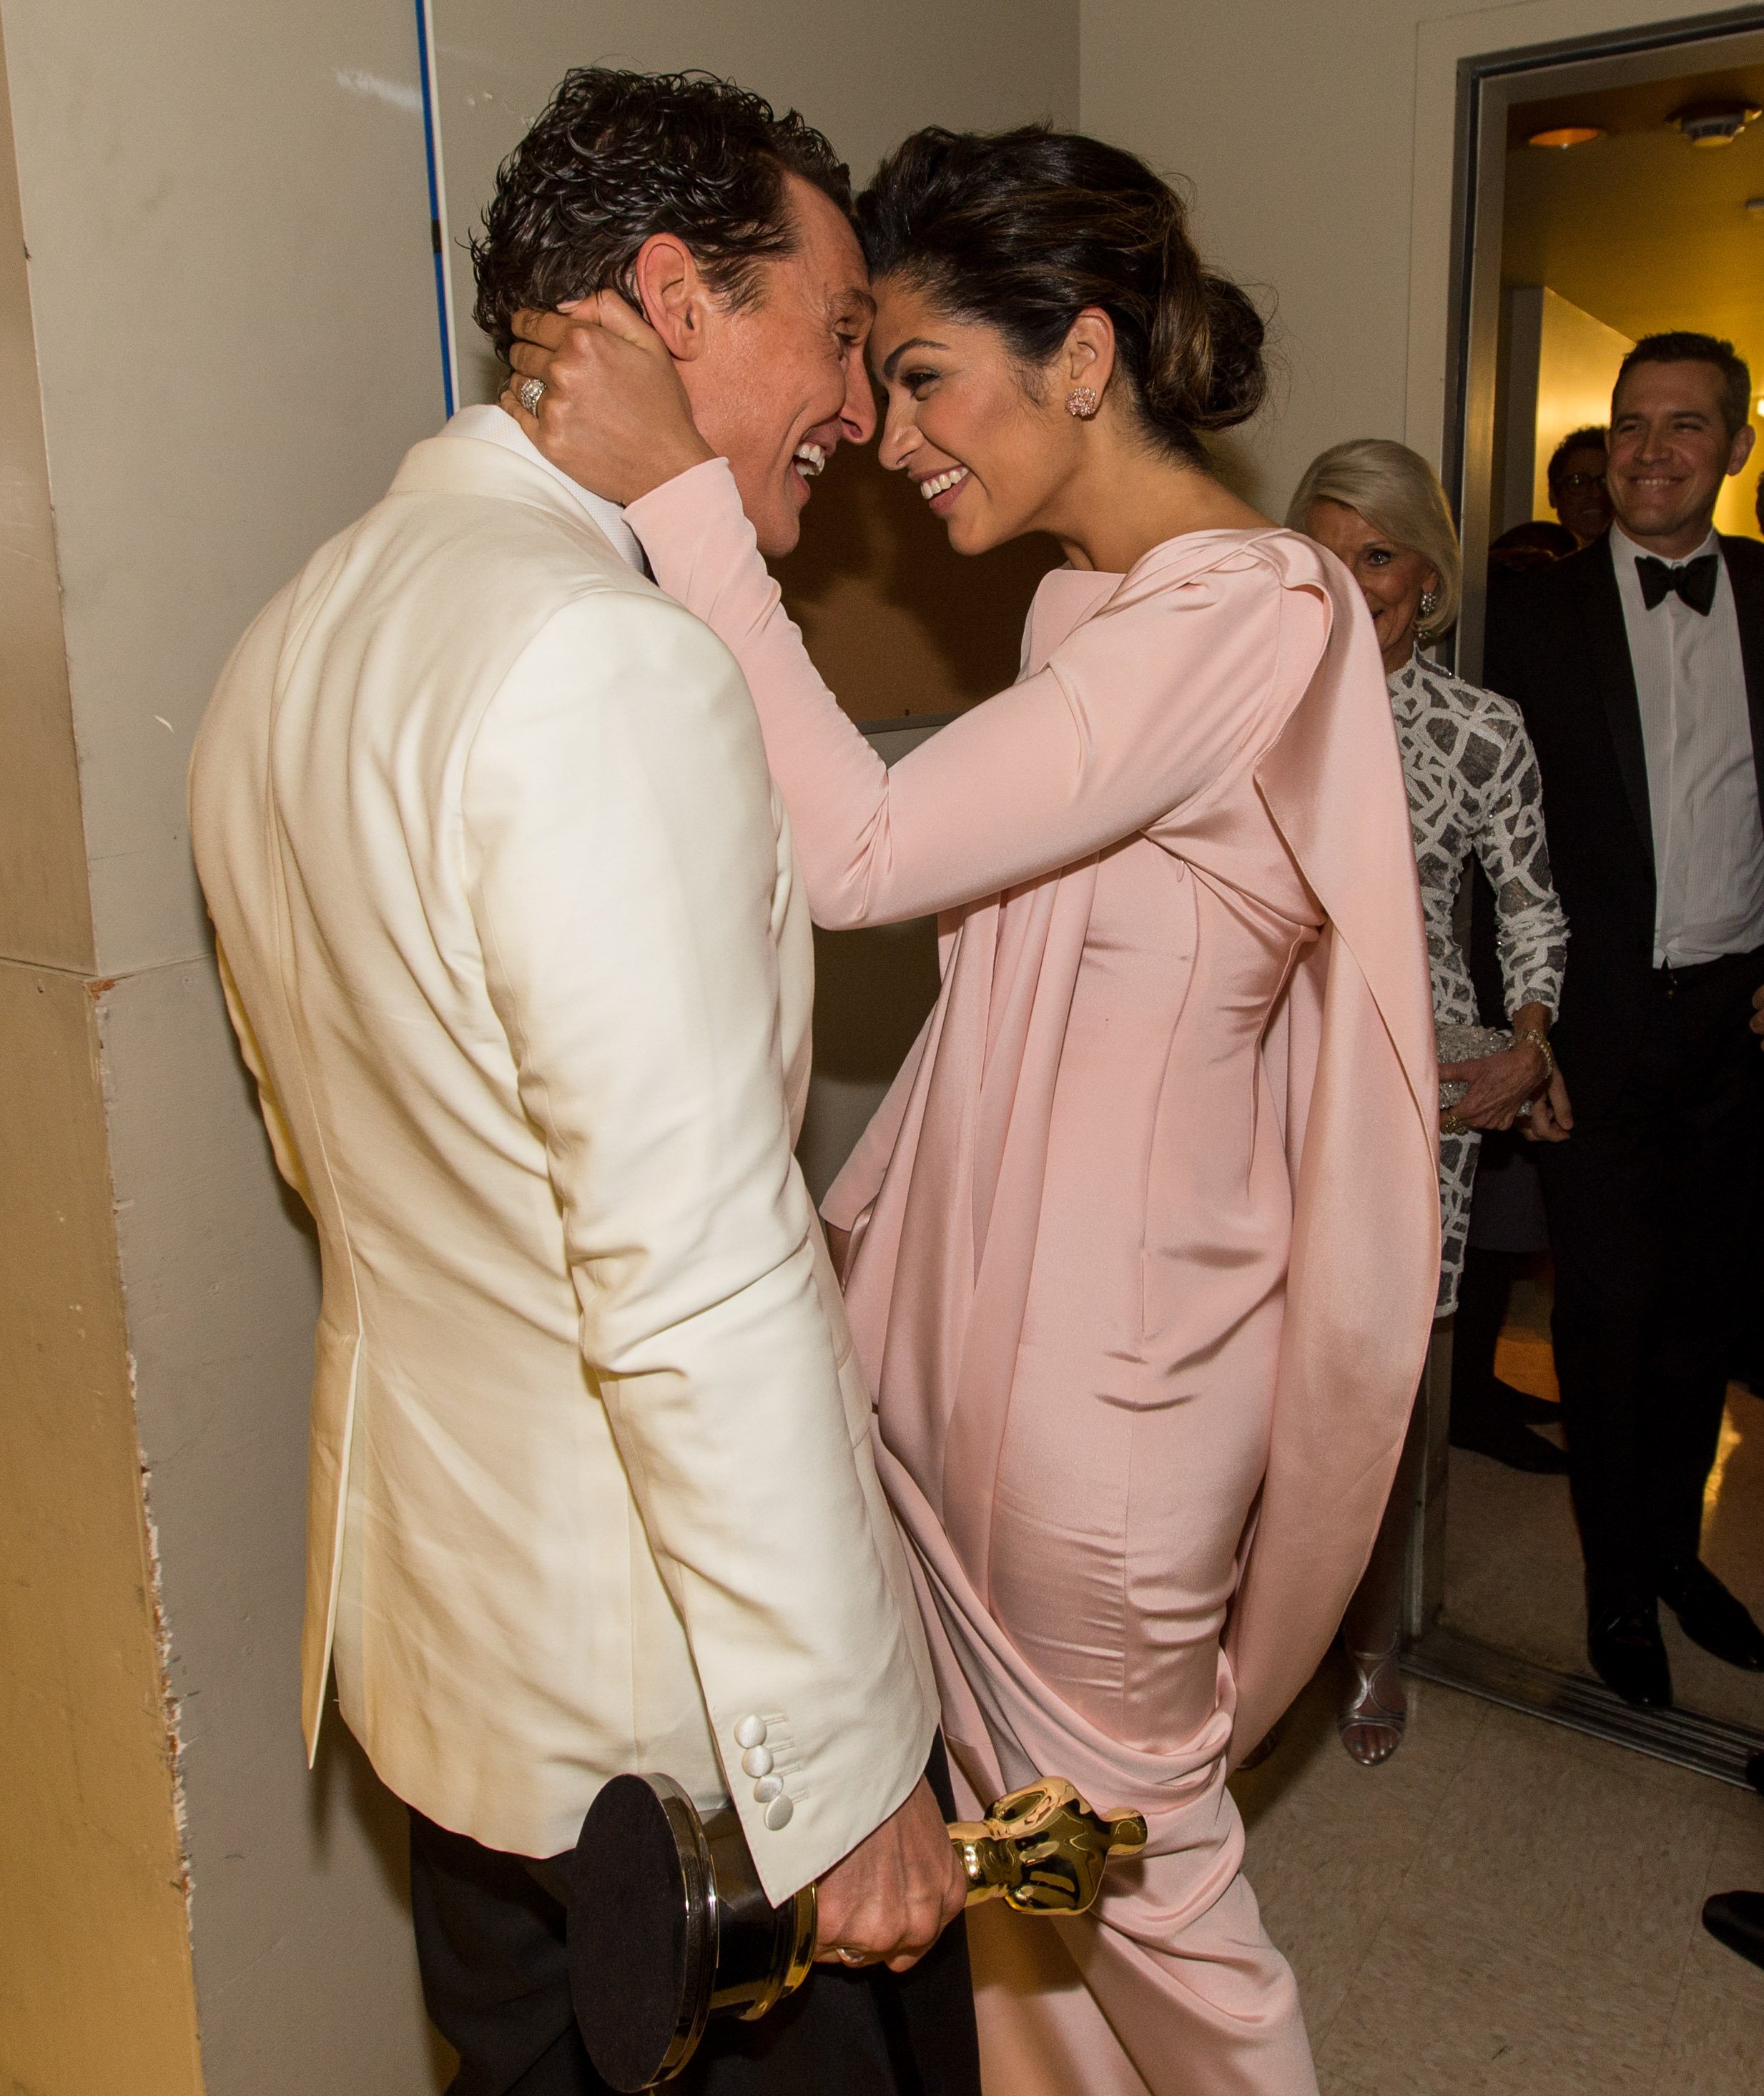 Matthew McConaughey and Camila Alves share a special moment backstage at the Oscars in Hollywood, California, March 2, 2014. | Source: Getty Images 